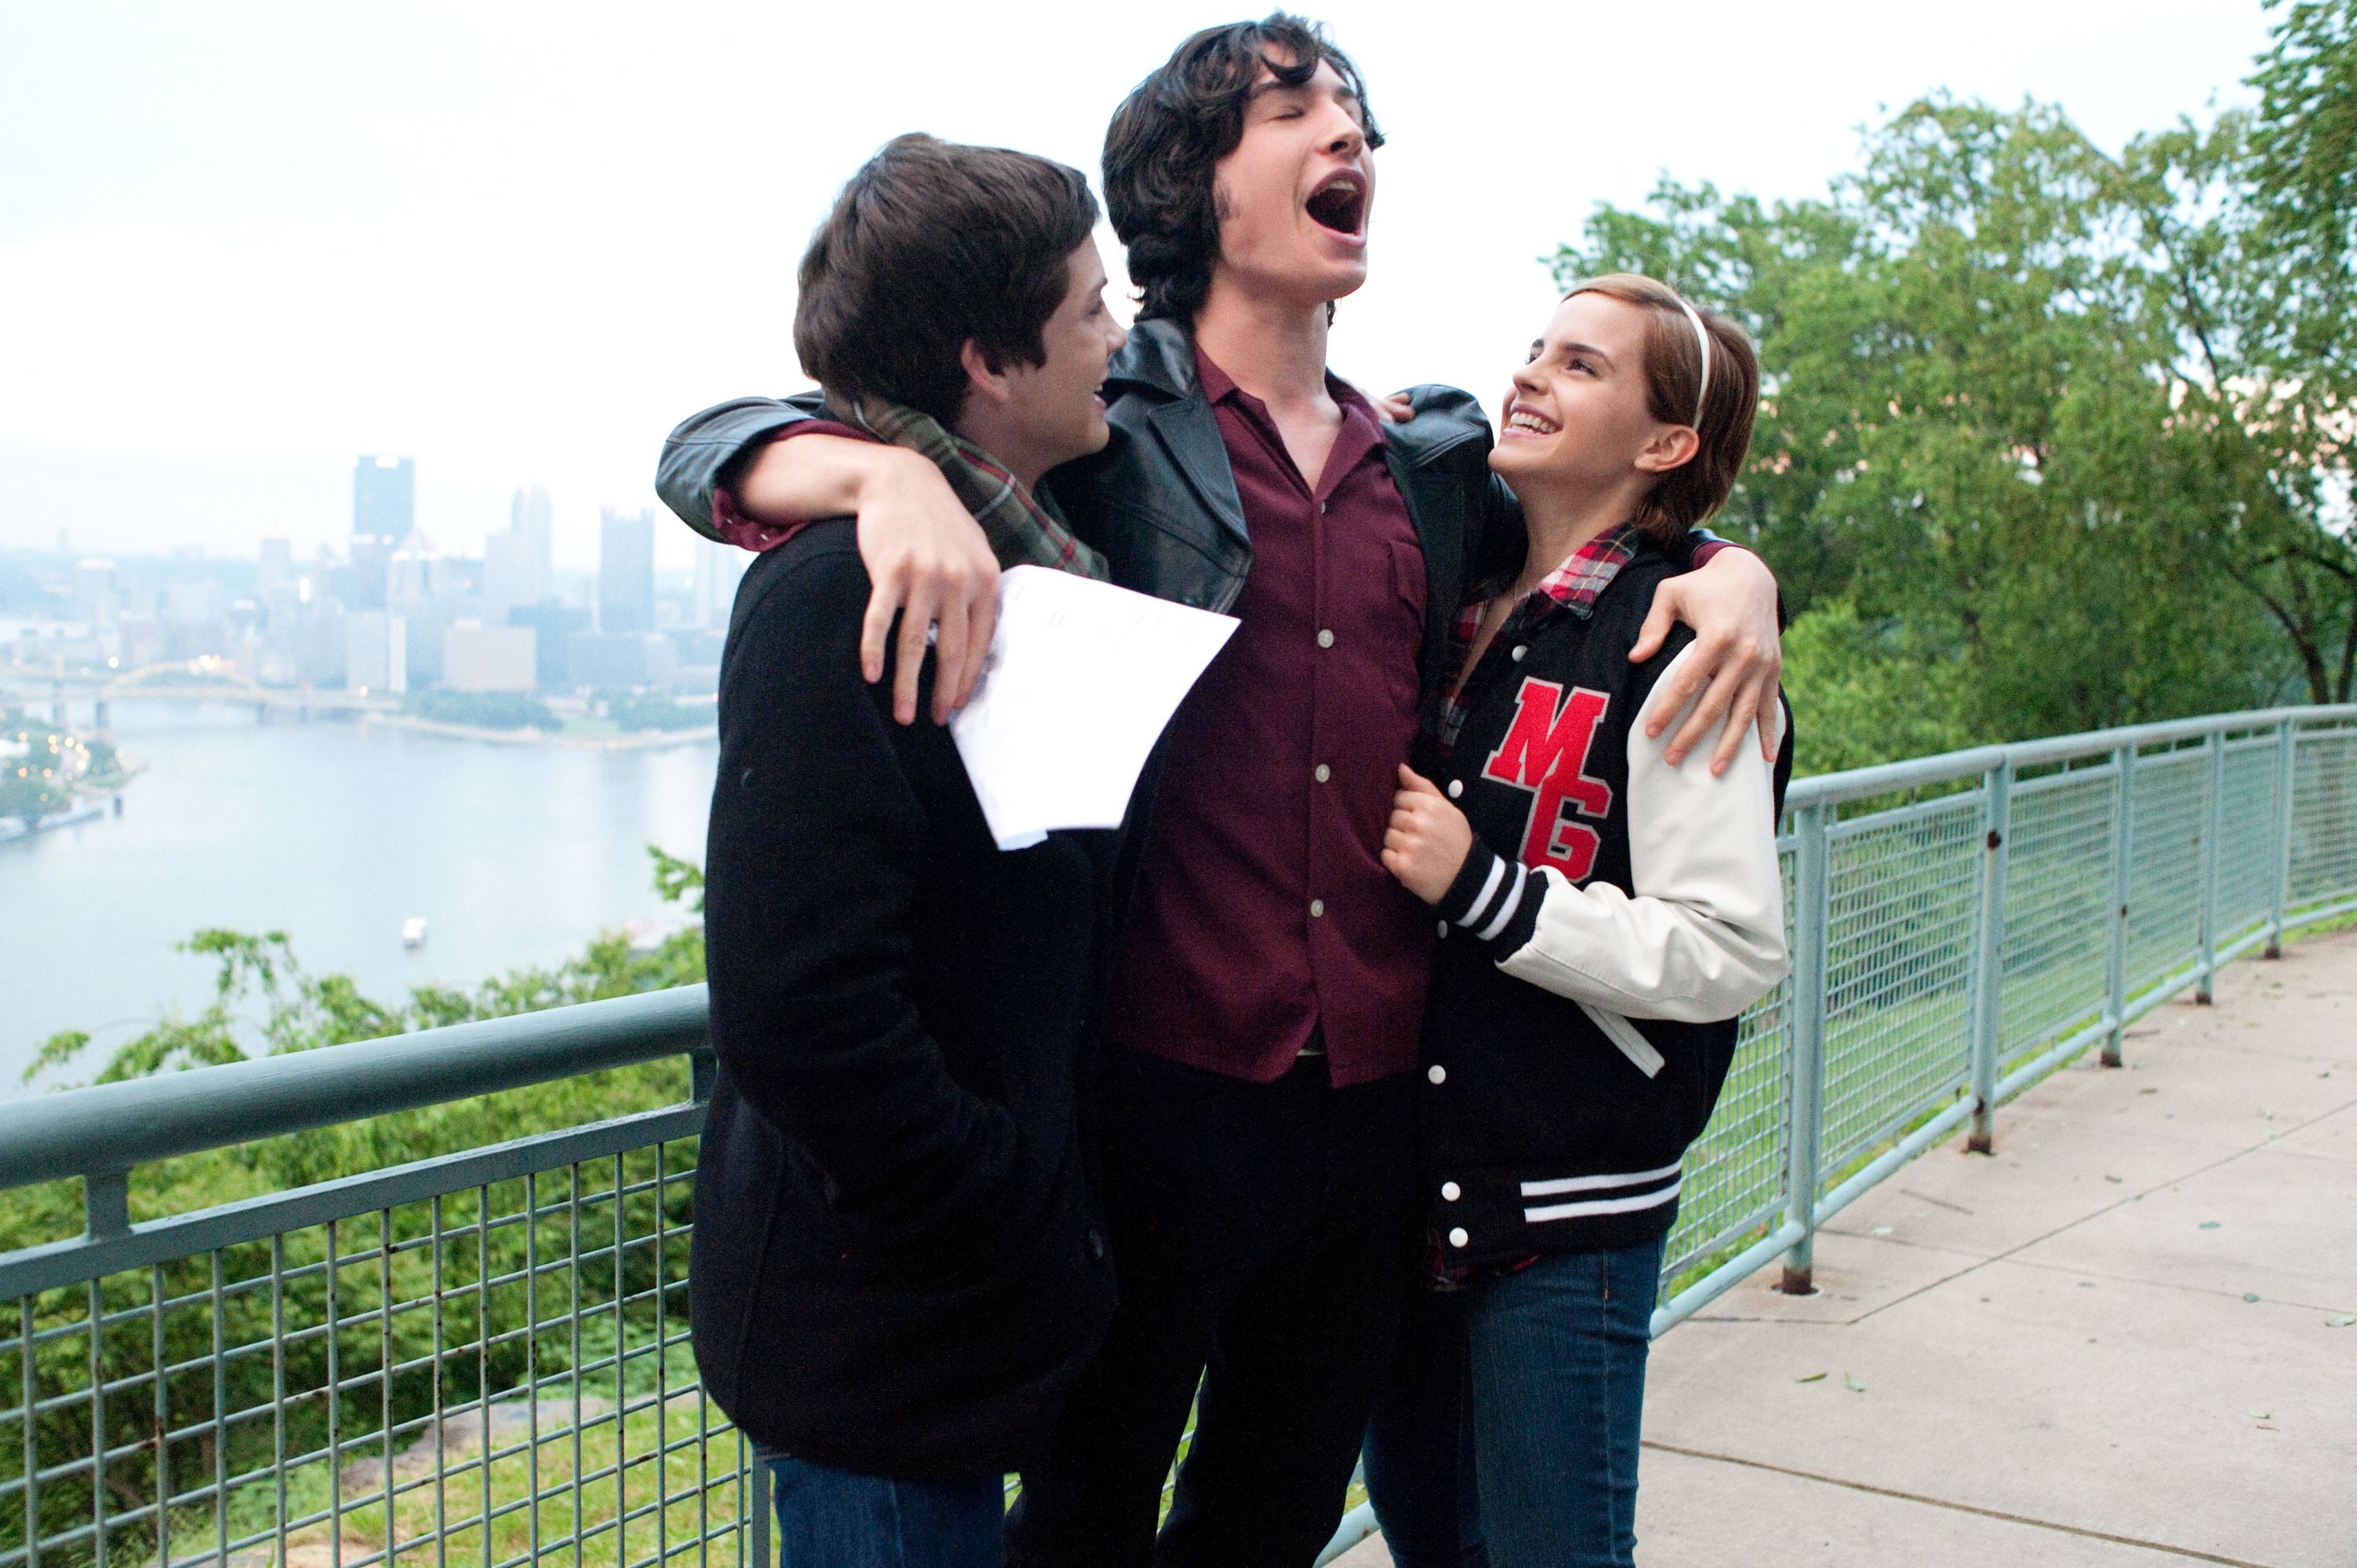 The Perks Of Being A Wallflower Photo #2